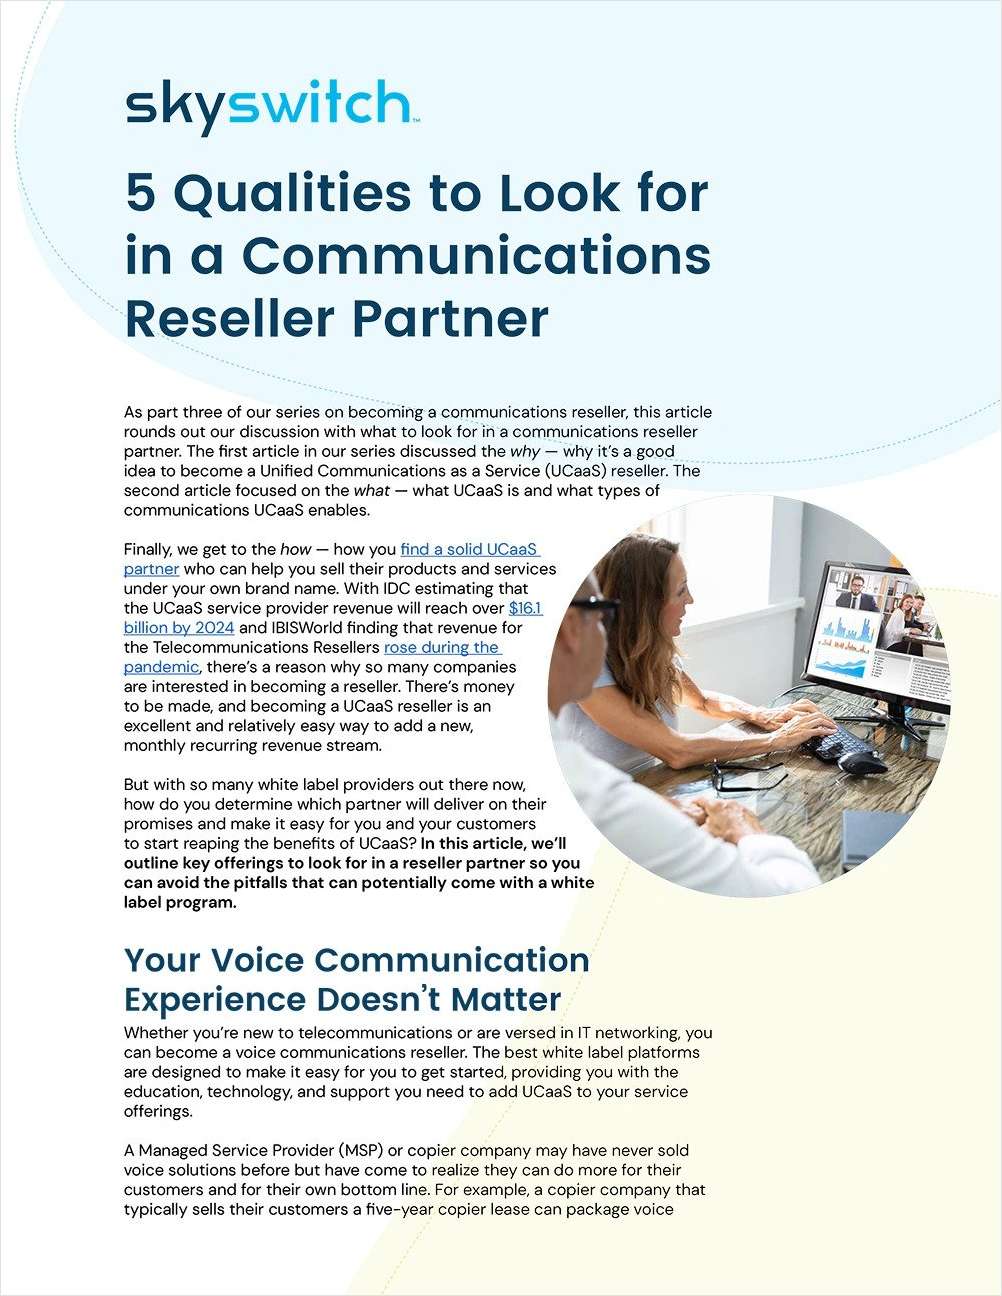 5 Qualities to Look for in a Communications Reseller Partner